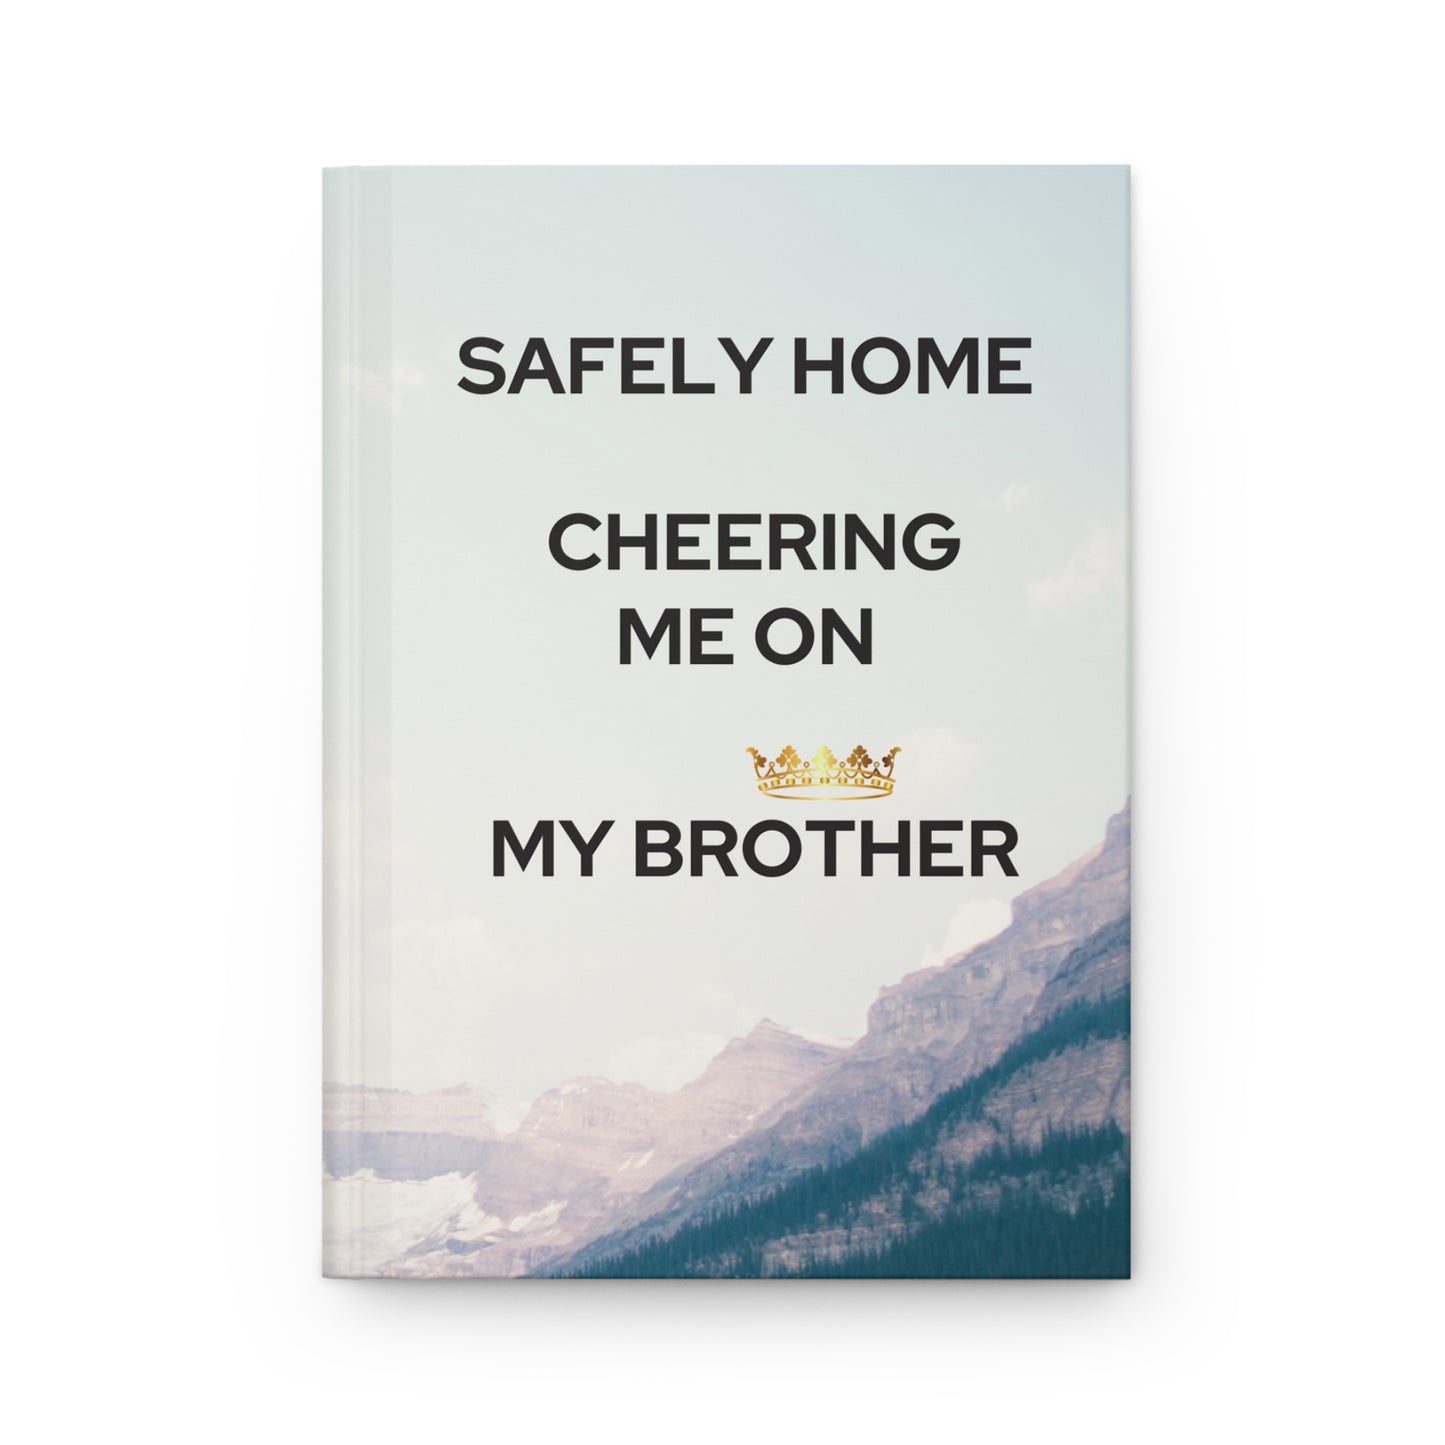 Grief Journal for Loss of Brother, Safely Home Cheering Me On